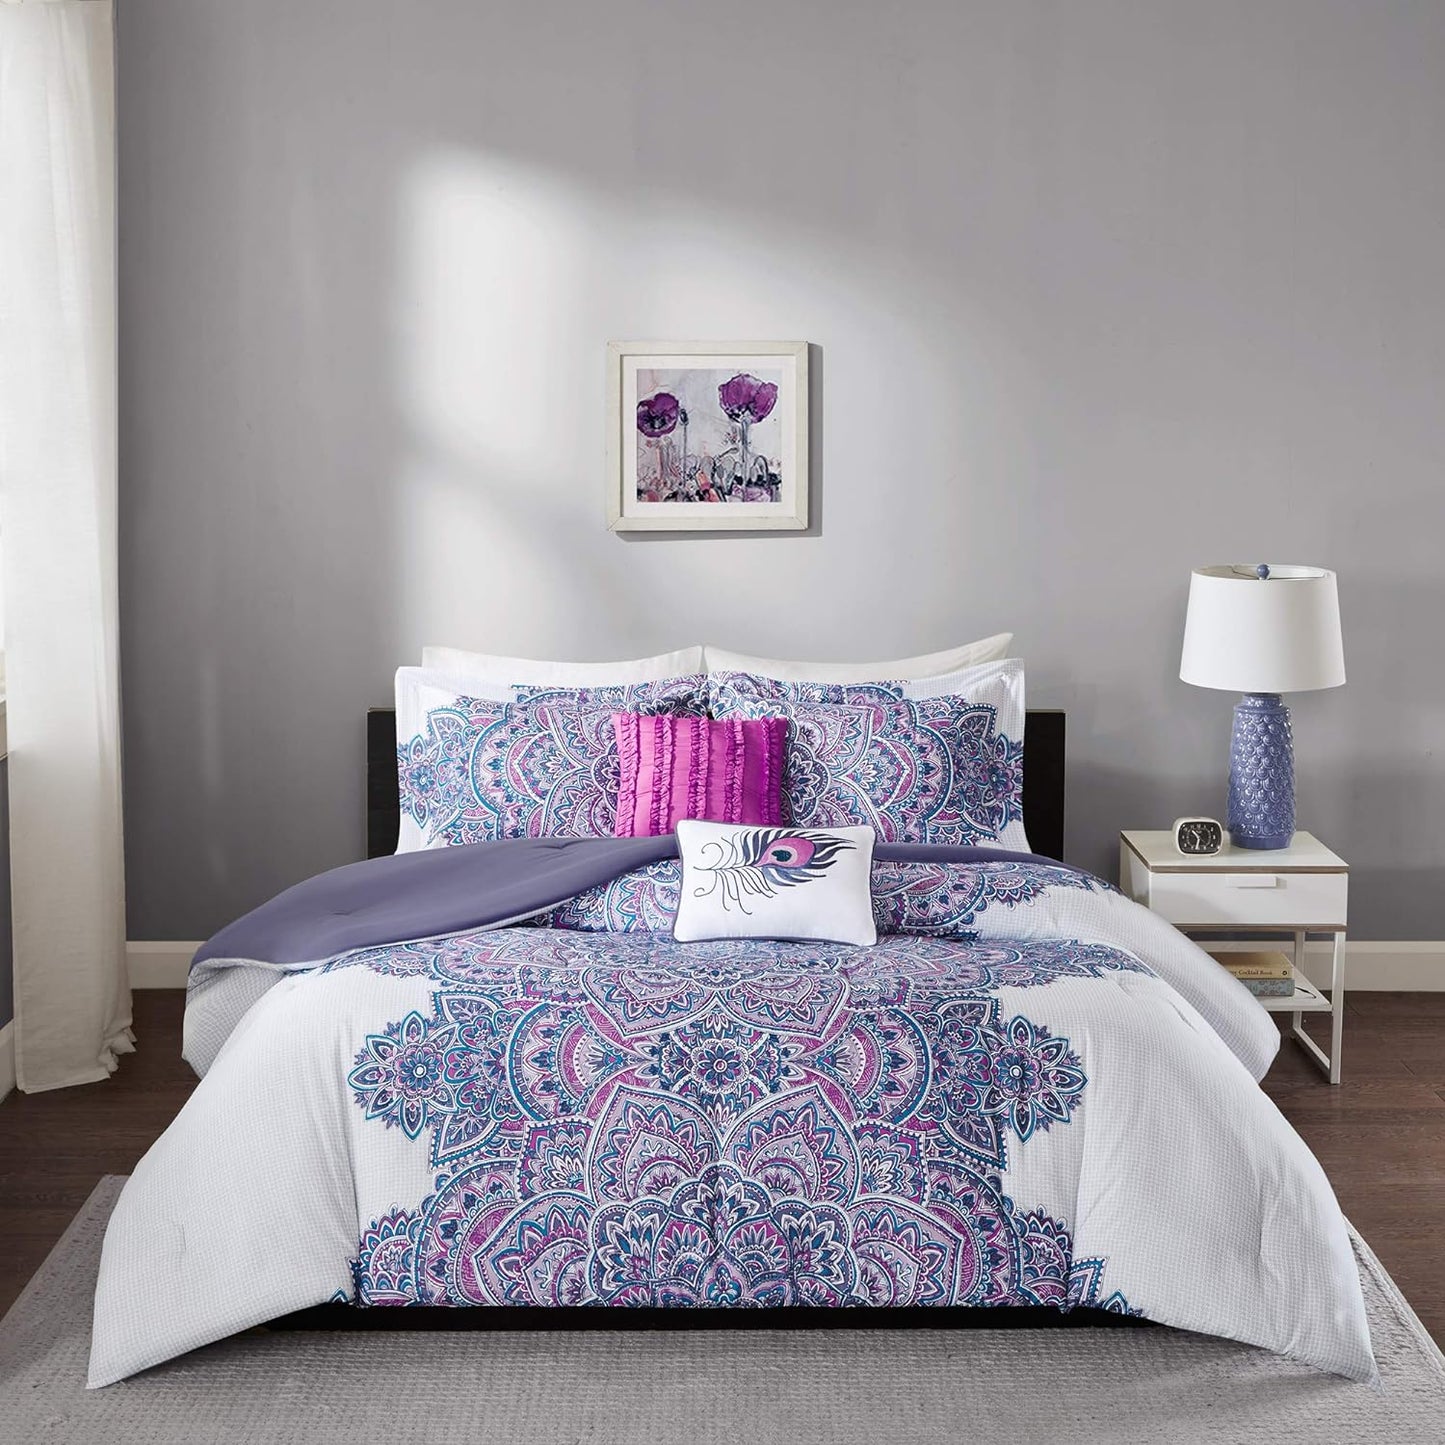 NEW - Intelligent Design Mila Comforter Bed Sets â€“ All Season Ultra Soft Microfiber Teen Bedding - Perfect For Dormitory-Great For Guest and Girls Bedroom, Full/Queen, Medallion Purple 5 Piece - Retail $63